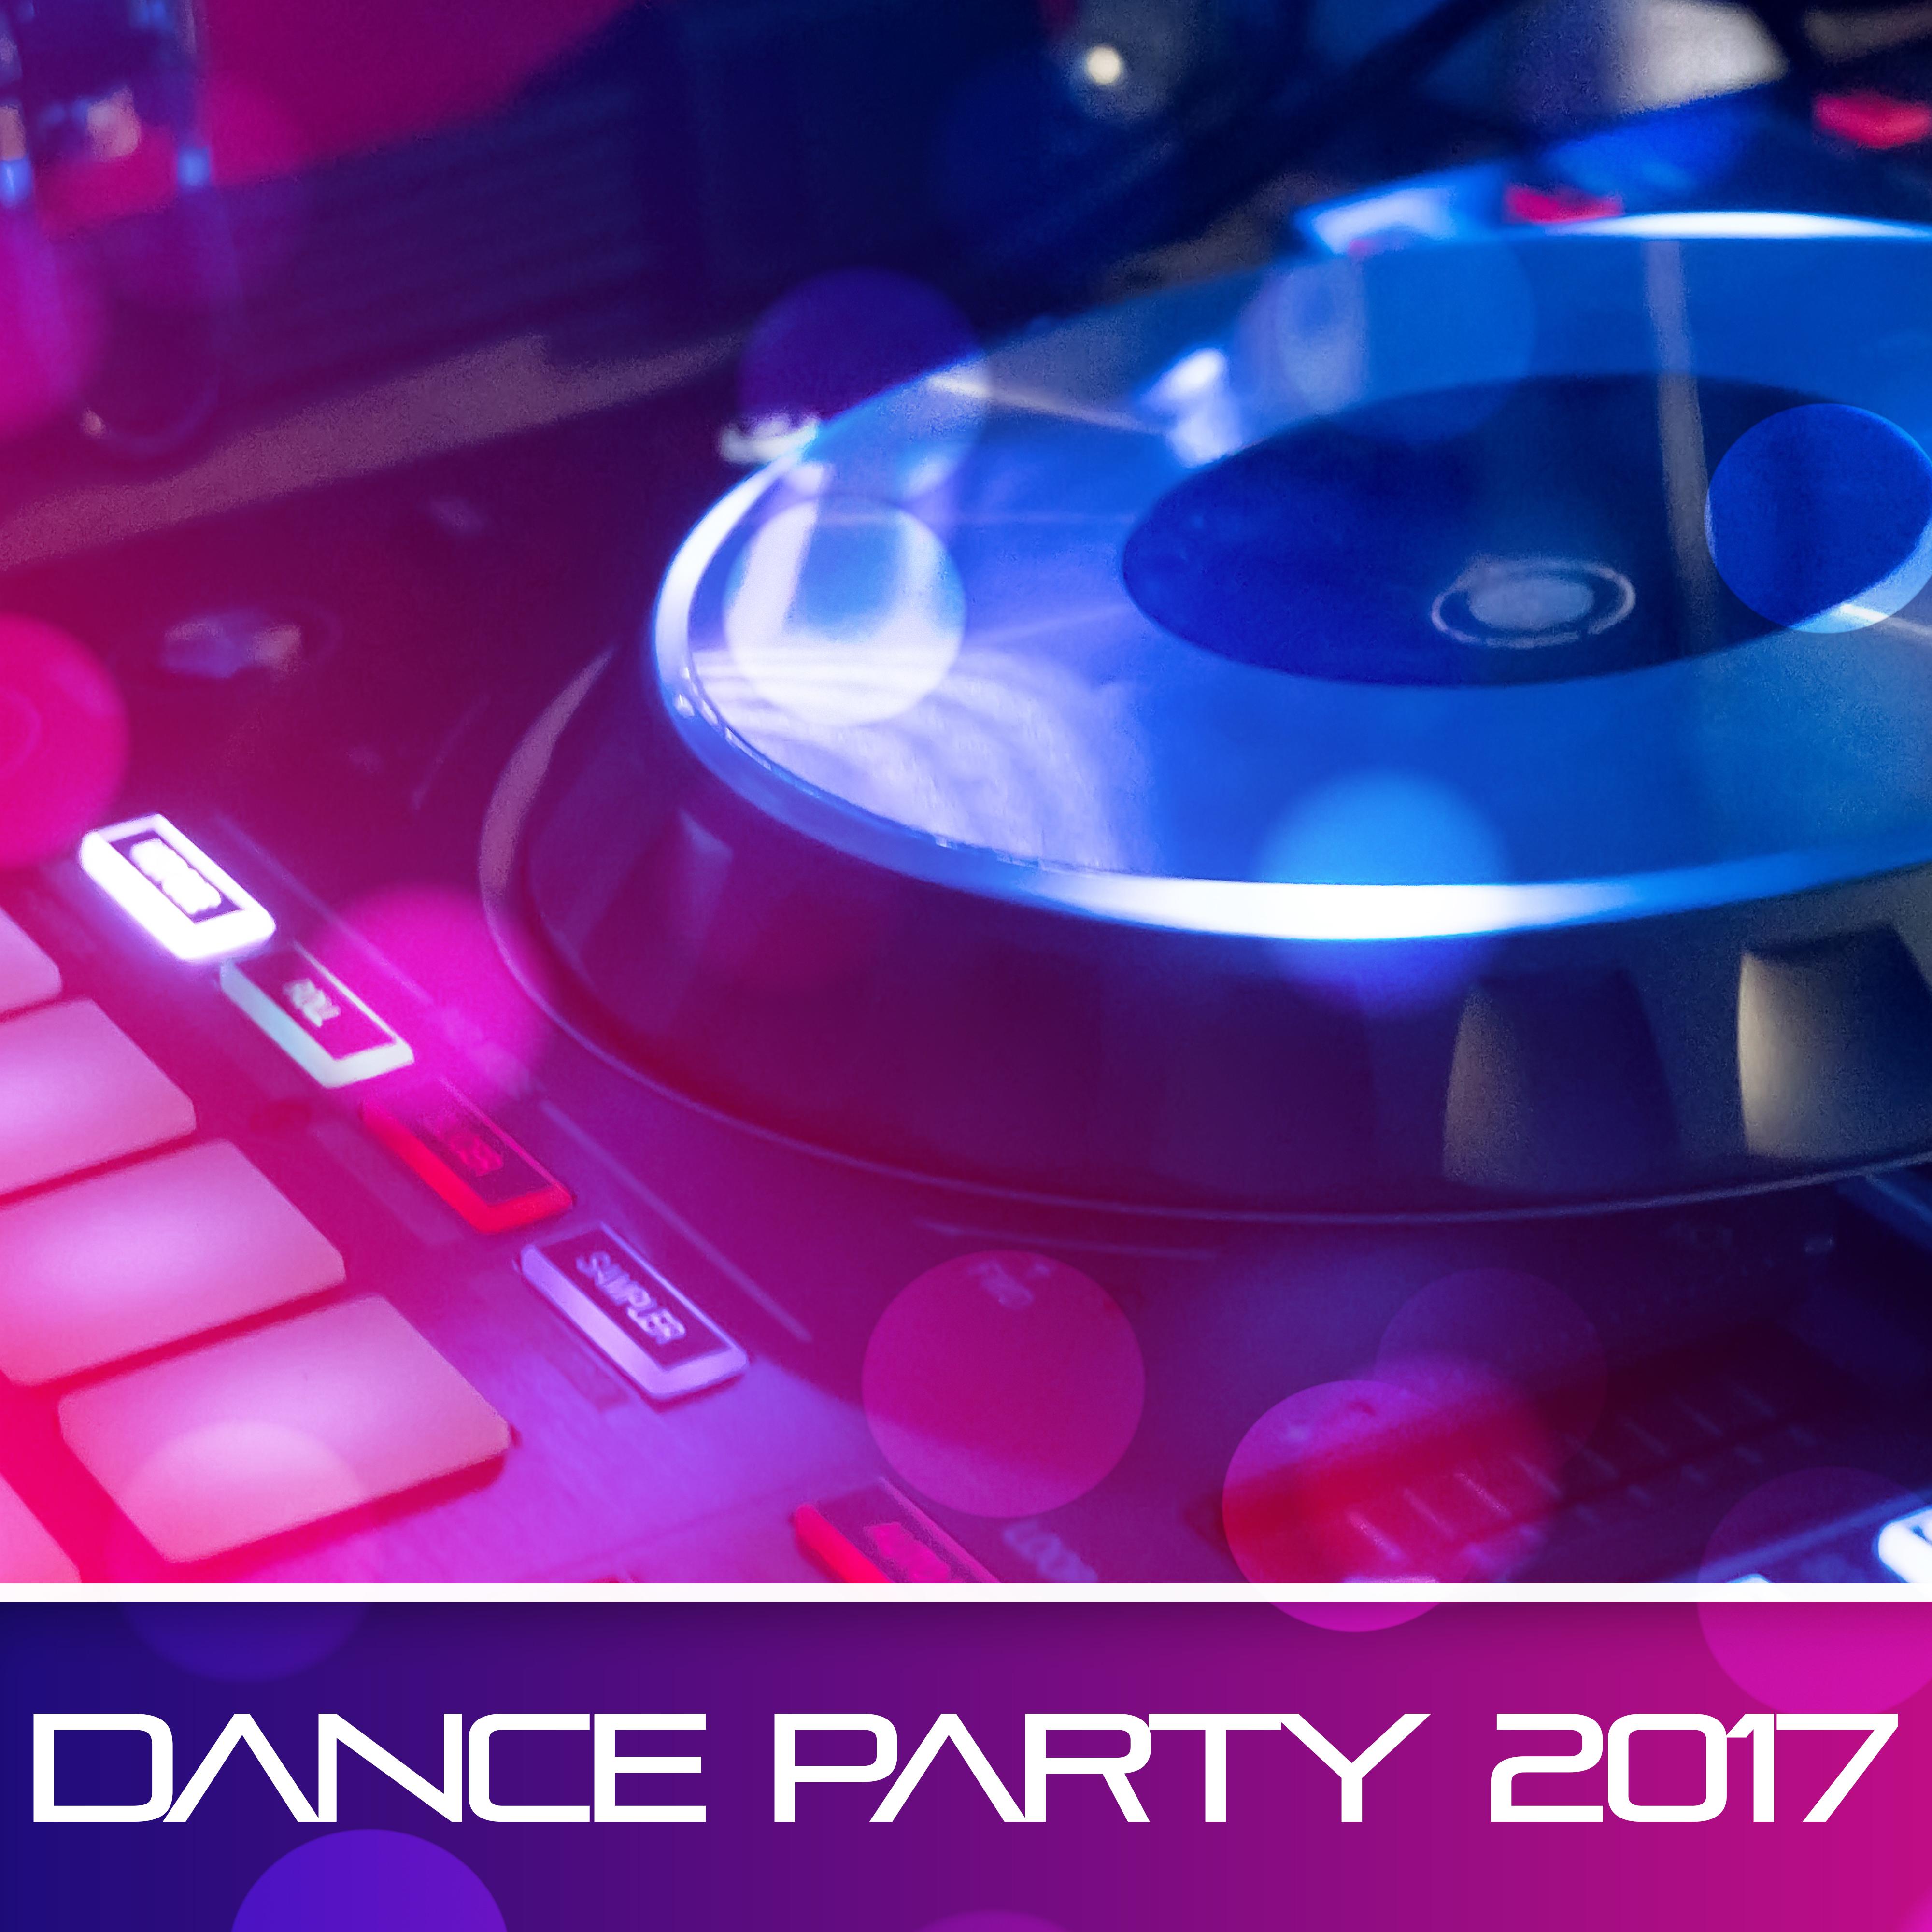 Dance Party 2017 Sexy Chilliout,  Beats, Deep Chillout Lounge, Relax, Chill Out 2017